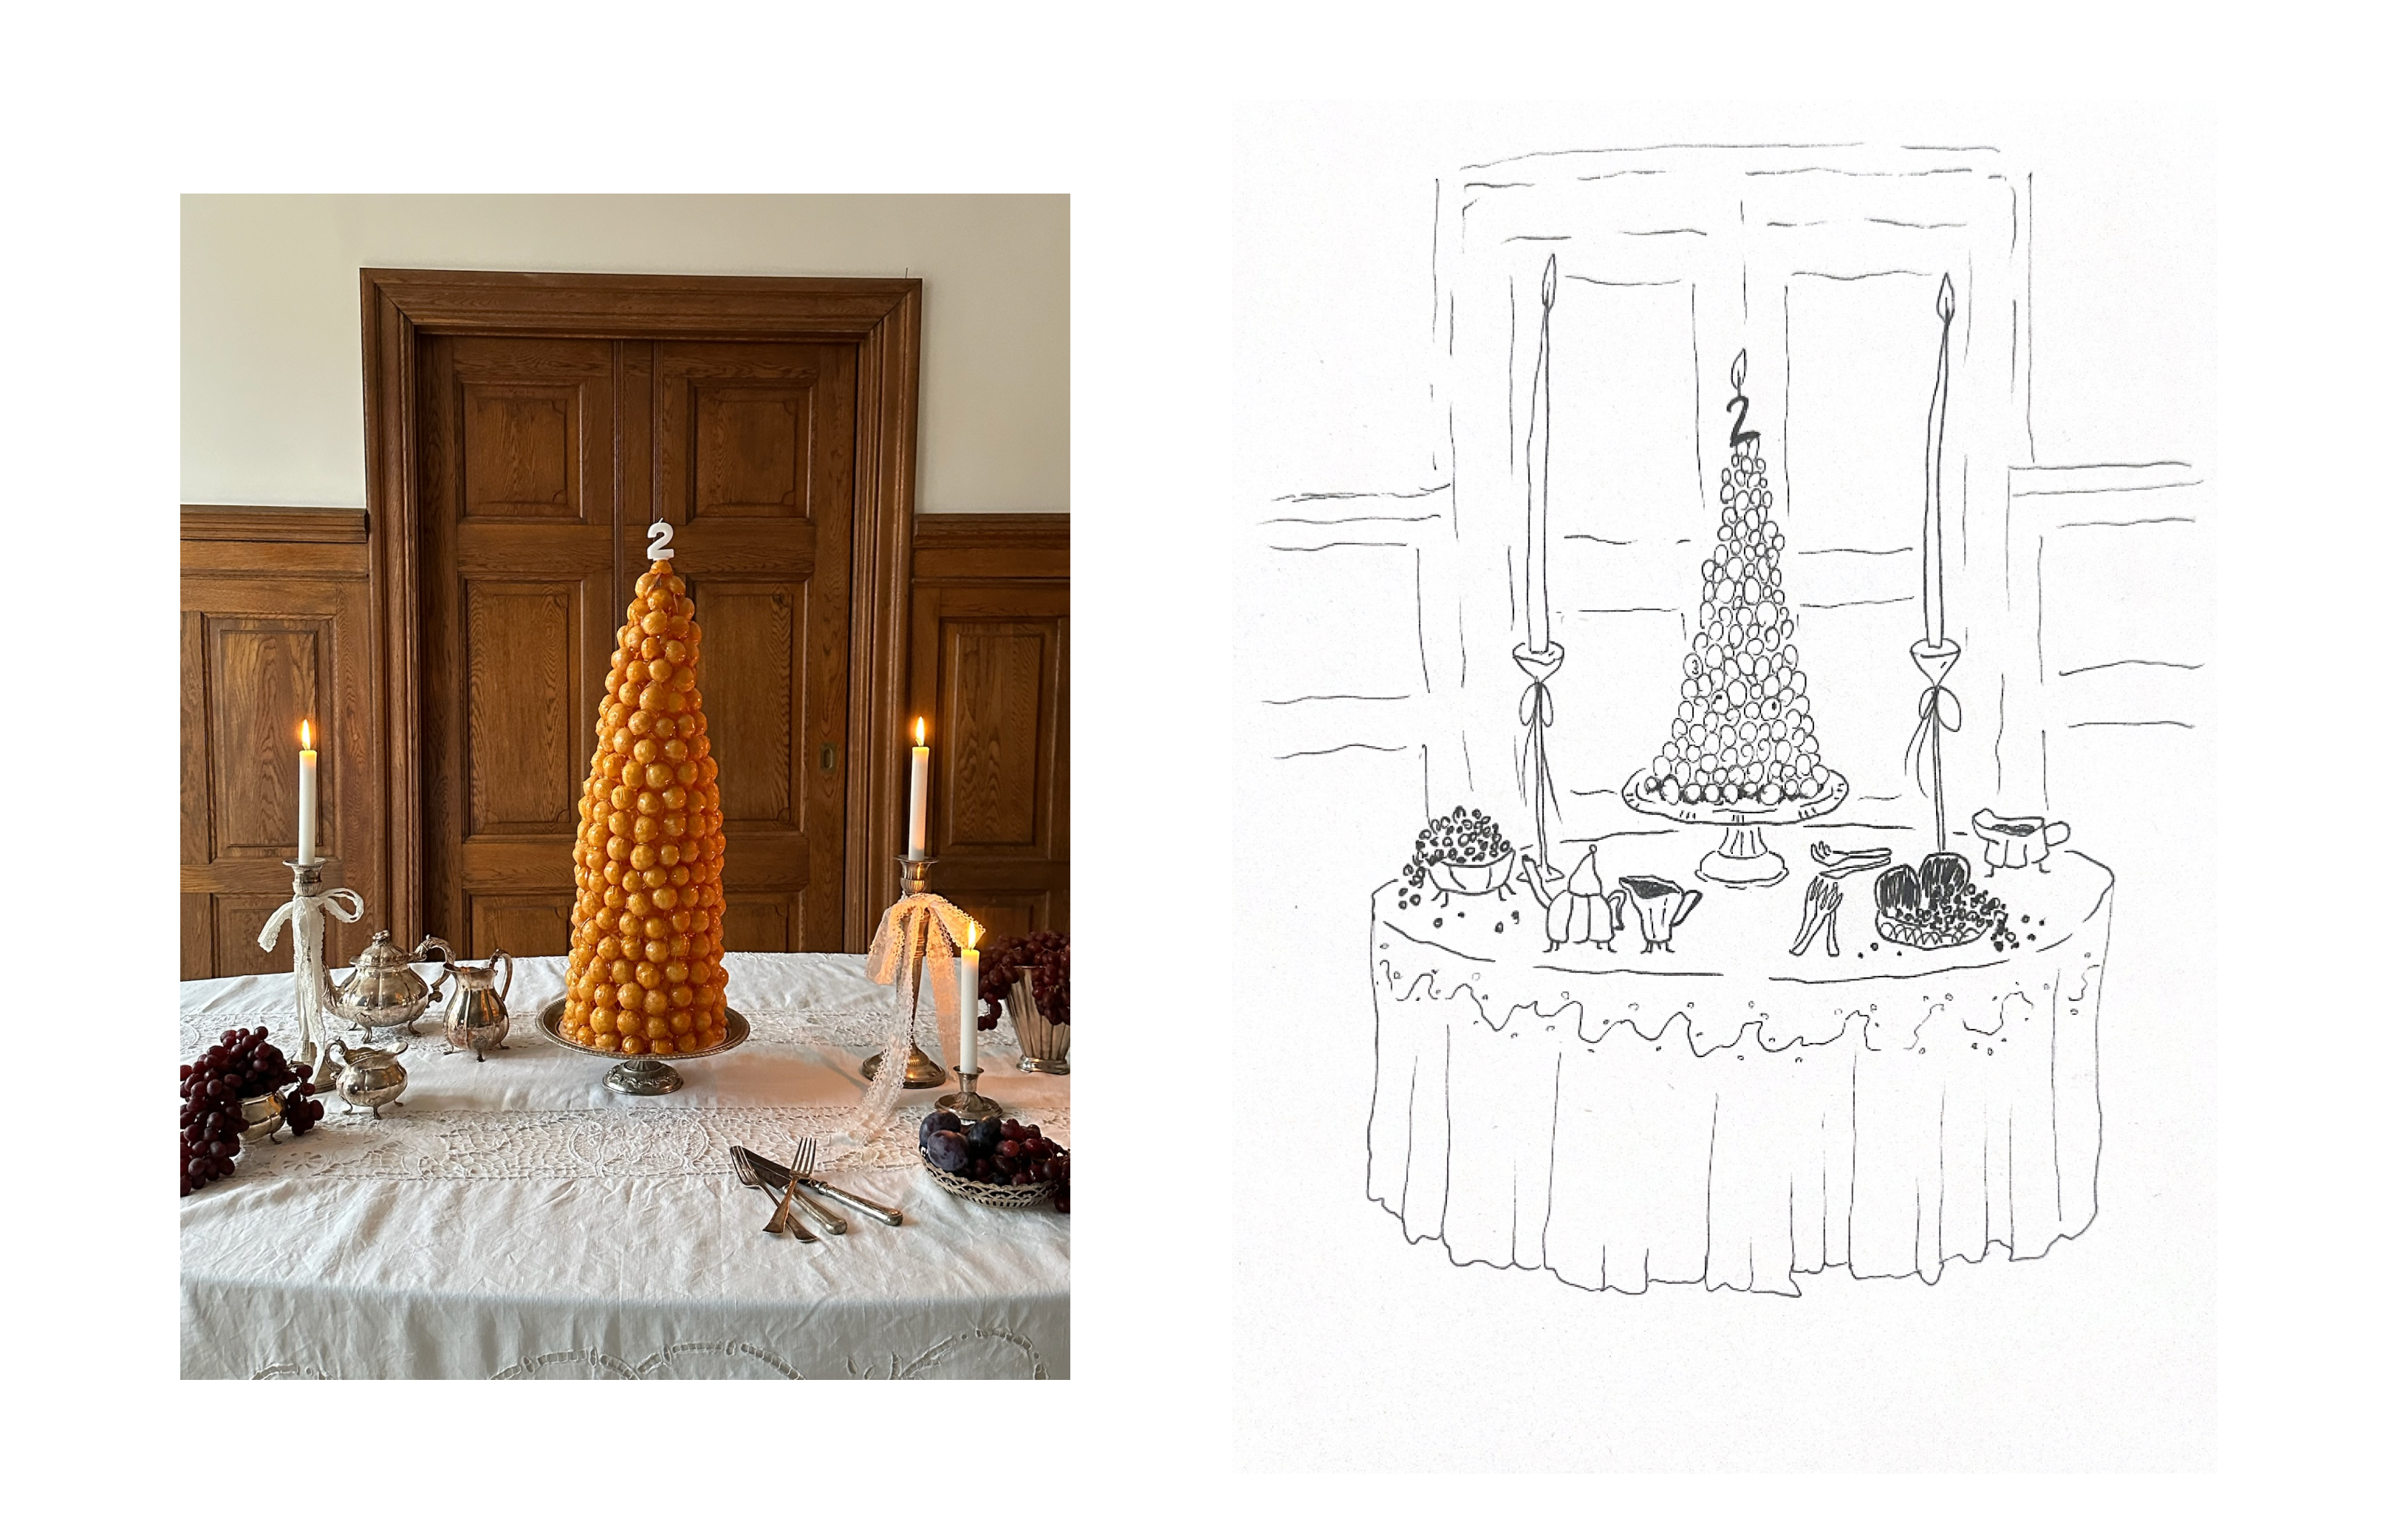 The birthday table setting captured and sketched by a friend of ours. What's a better occasion for the French classic, Crouquembouche than a 2 years birthday?